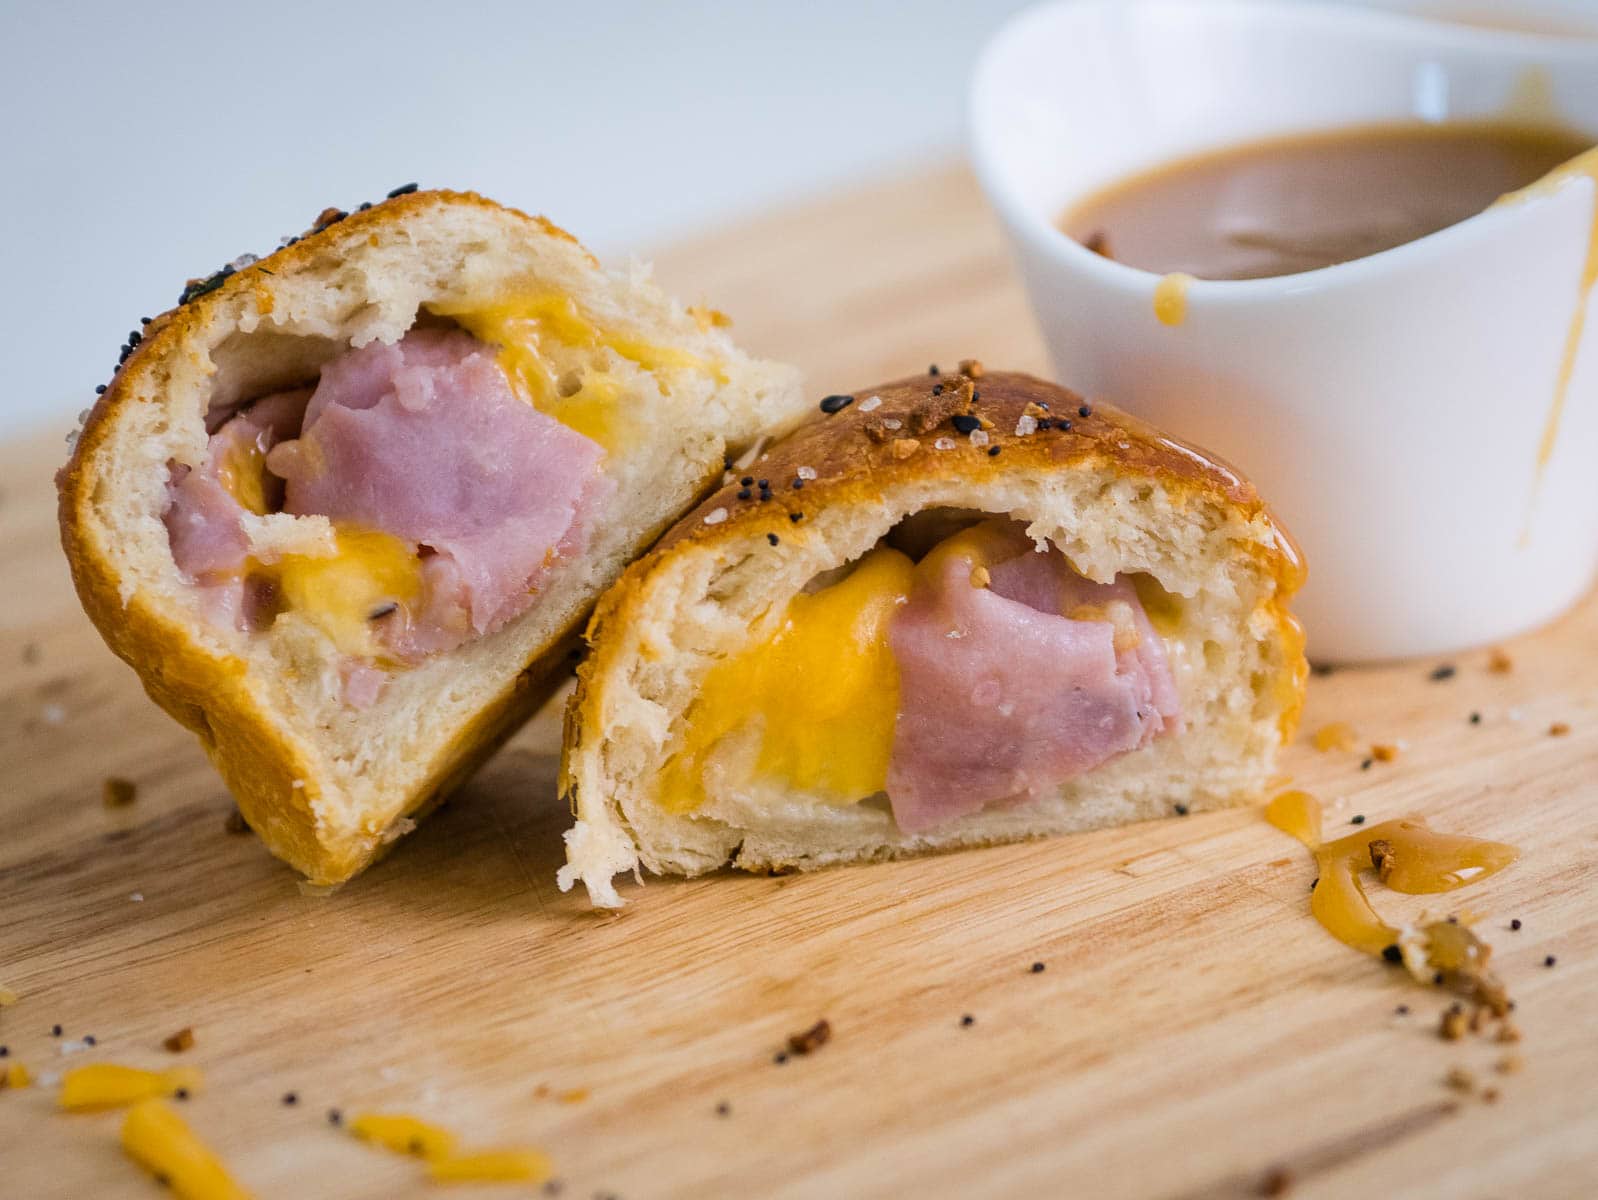 Ham and cheese biscuits cut in half with mustard dipping sauce.